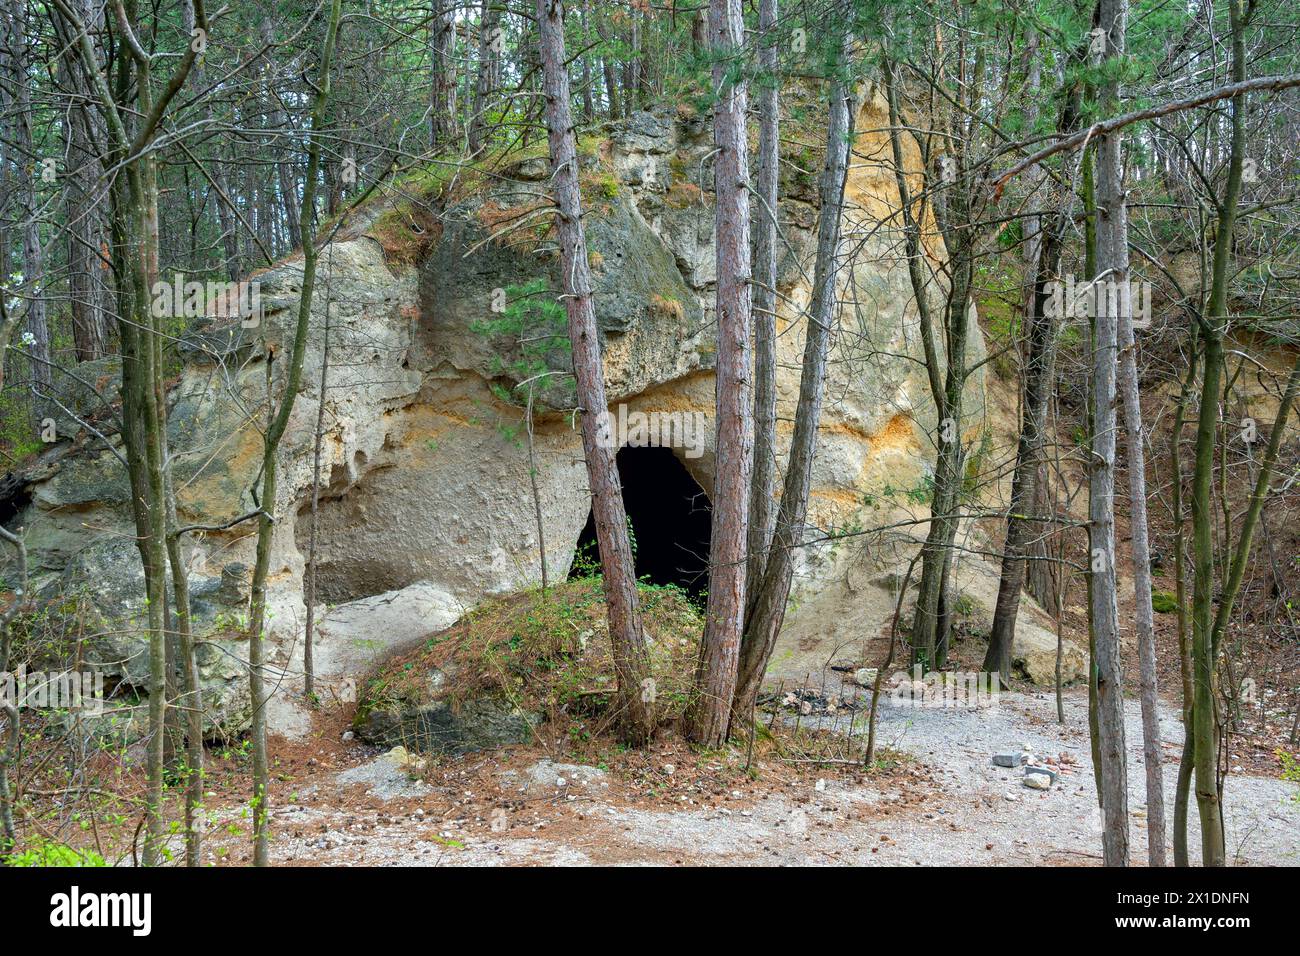 artificial caves in the dolomite rock at the Harzberg mountain above Bath Voeslau, resulting by the former extraction of grinding sand, Austria Stock Photo